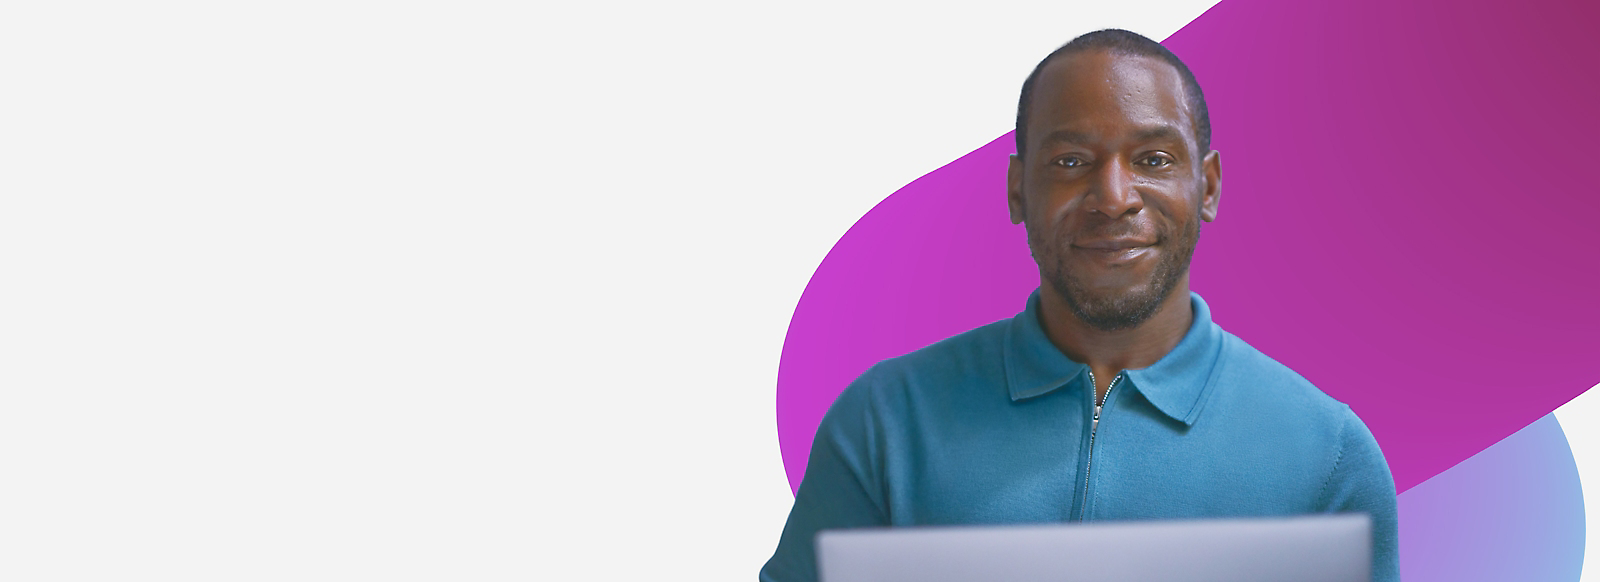 A man holding a laptop in front of a purple background.